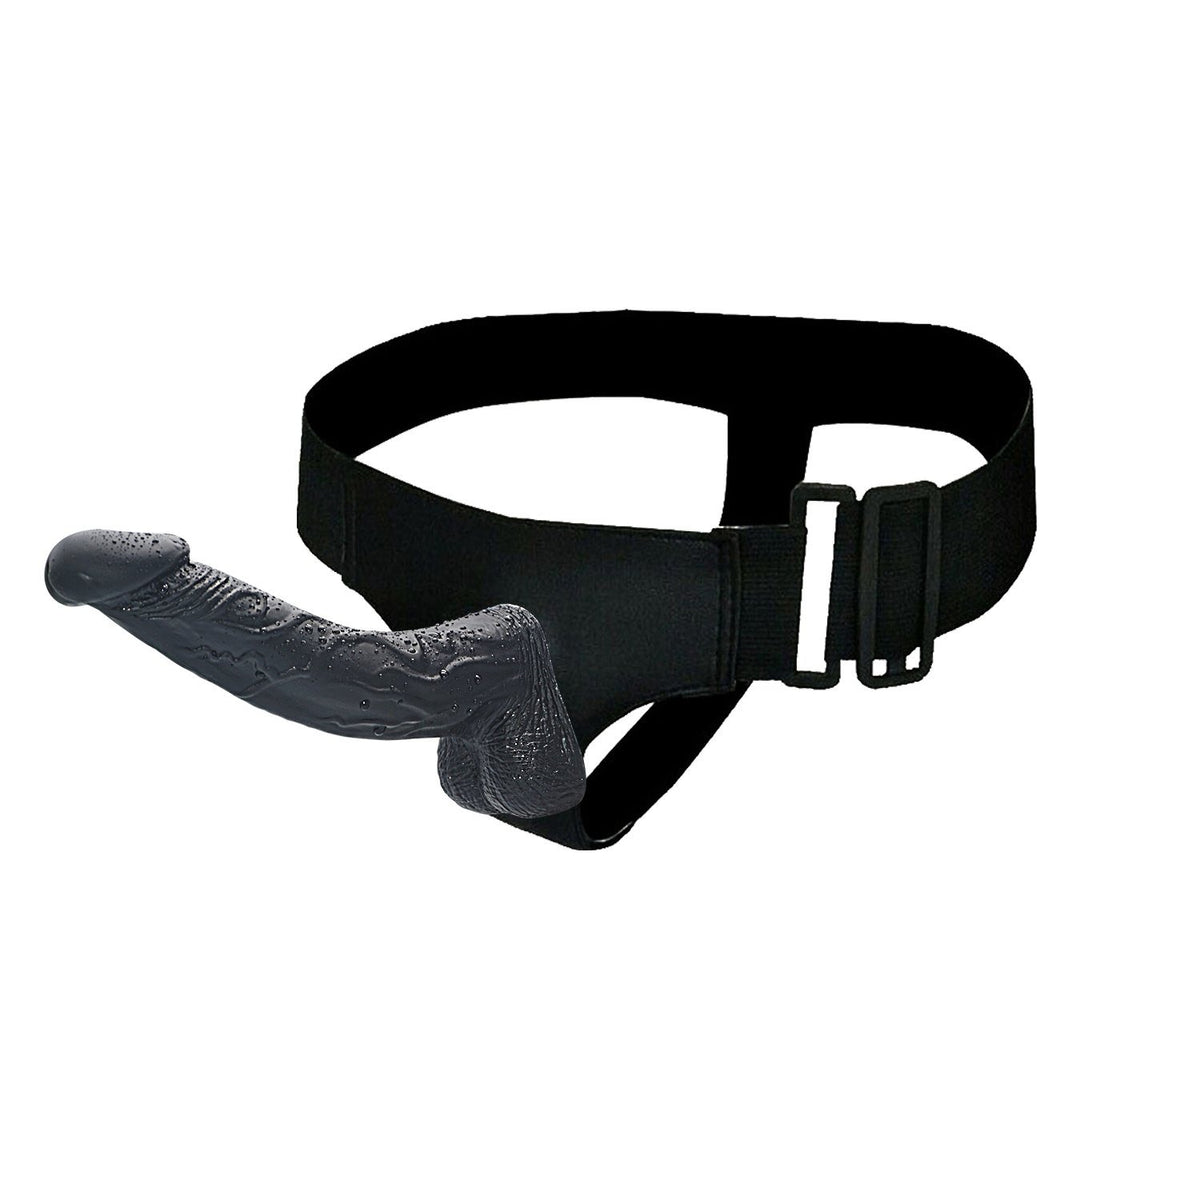 MD 21cm Strap On Harness with Dildo - Black